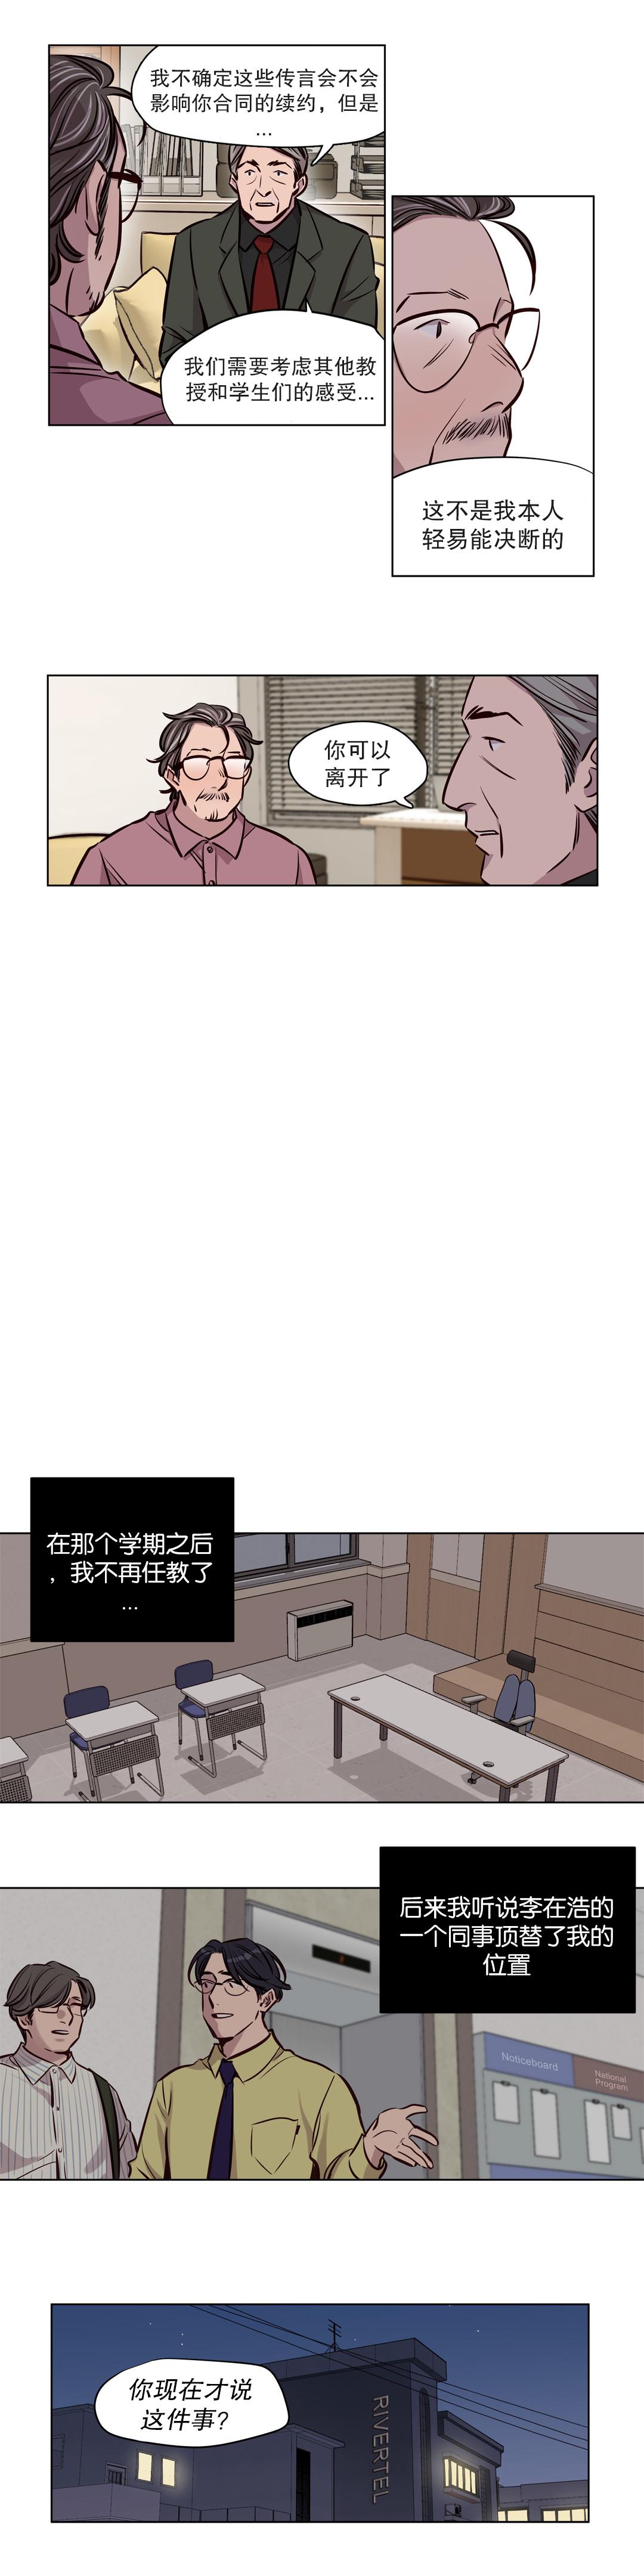 Negro [Ramjak] 赎罪营(Atonement Camp) Ch.50-52 (Chinese) Step Fantasy - Page 5